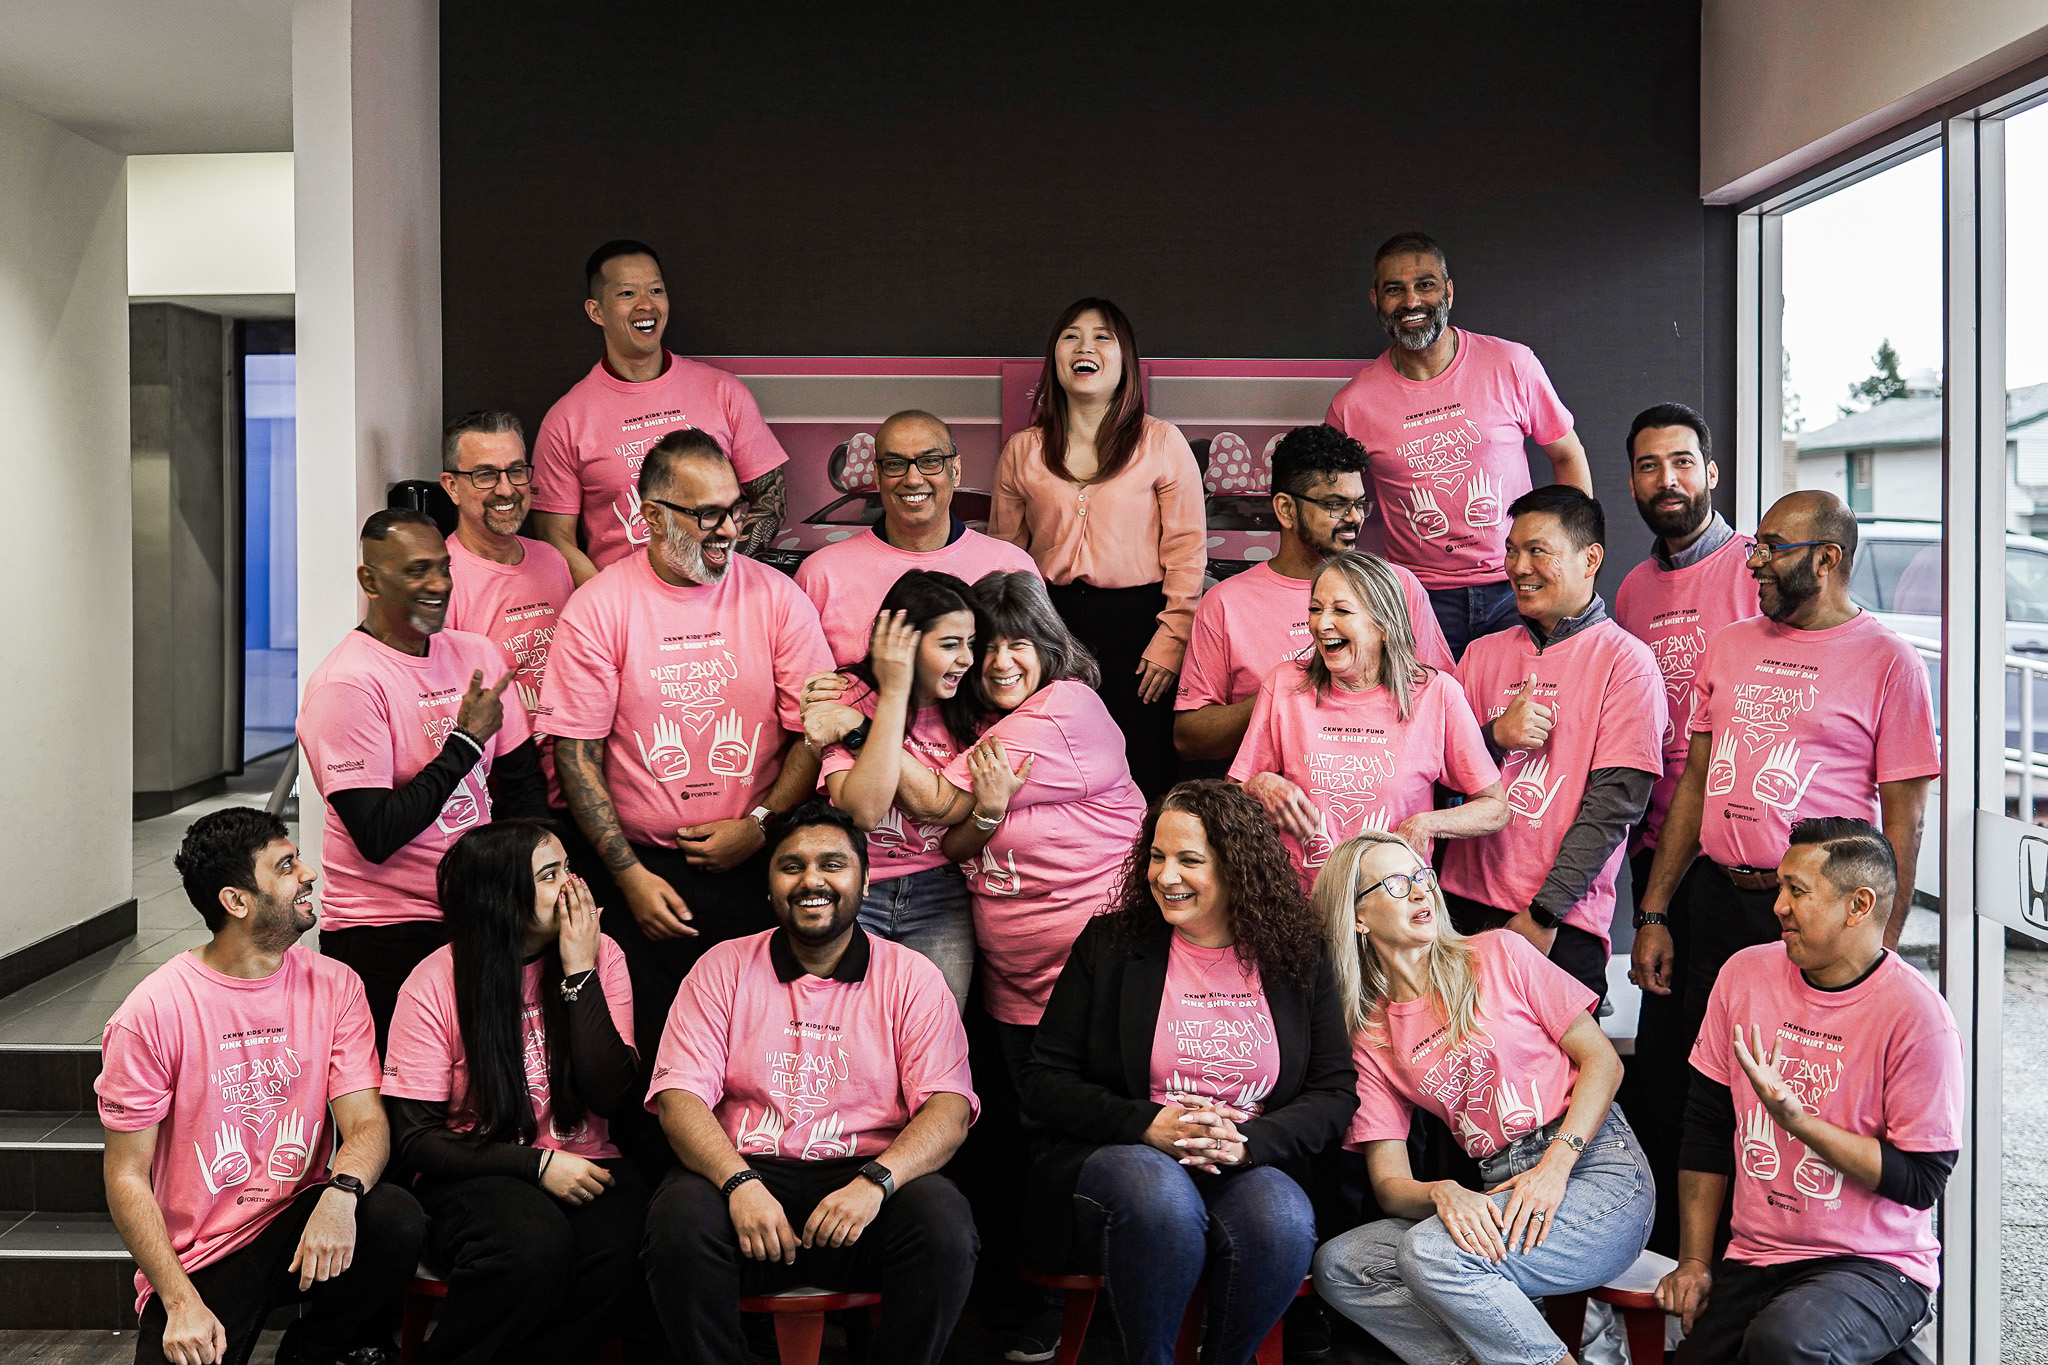 OpenRoad Group Raises Awareness for Pink Shirt Day